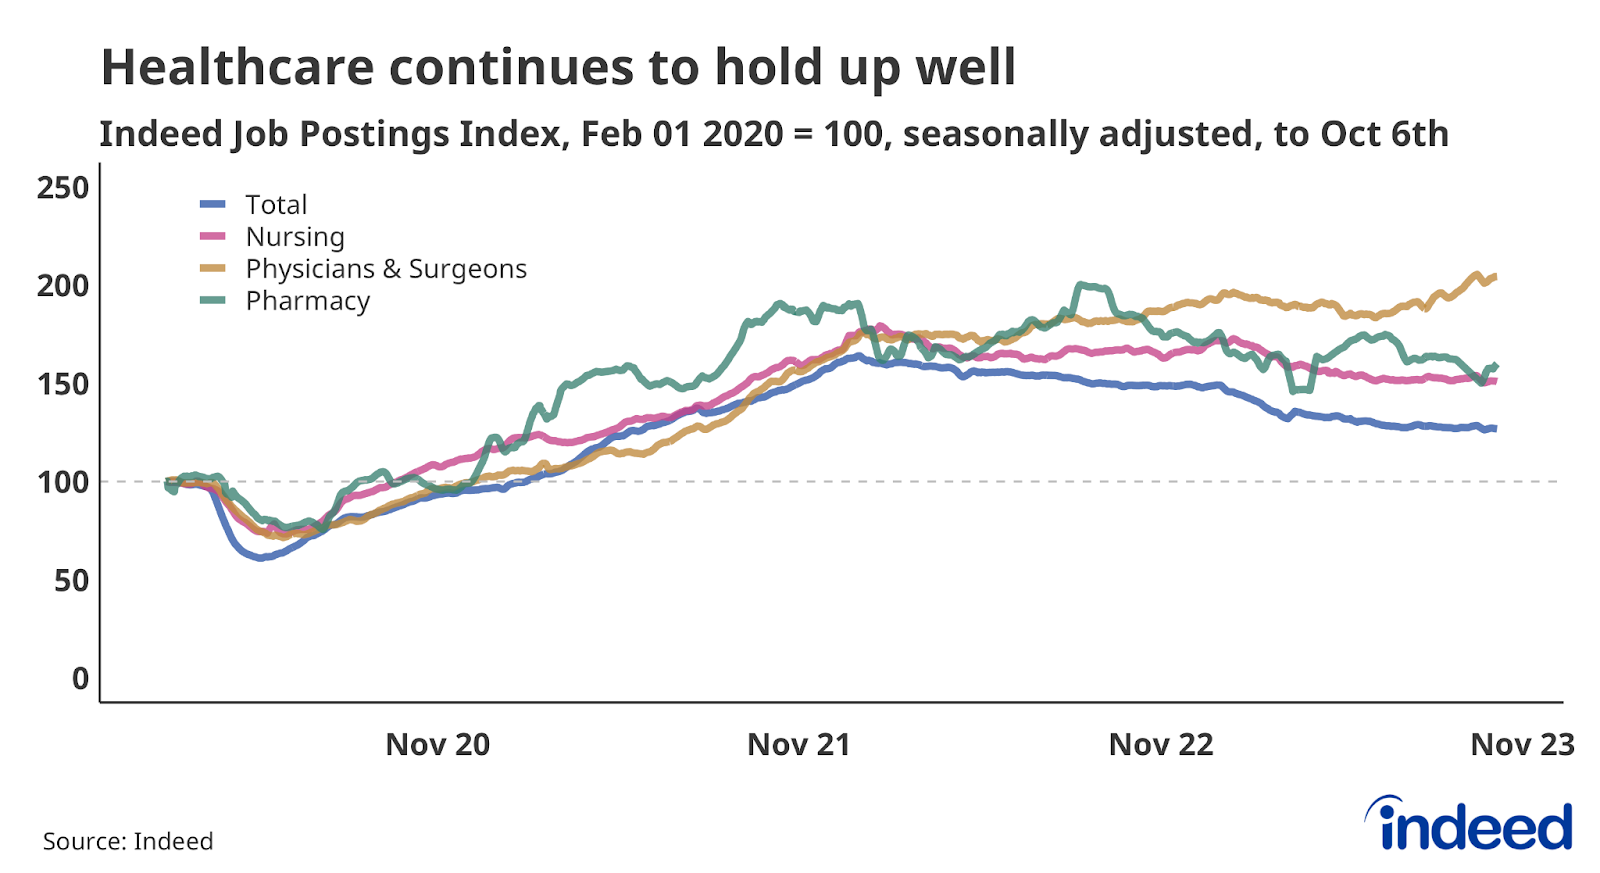 Line chart titled "Healthcare continues to hold up well," shows job postings in Nursing, Physicians & Surgeons, and Pharmacy to October 6, 2023. Physicians & Surgeons postings have notched recent gains, while Nursing and Pharmacy postings have dropped further. 